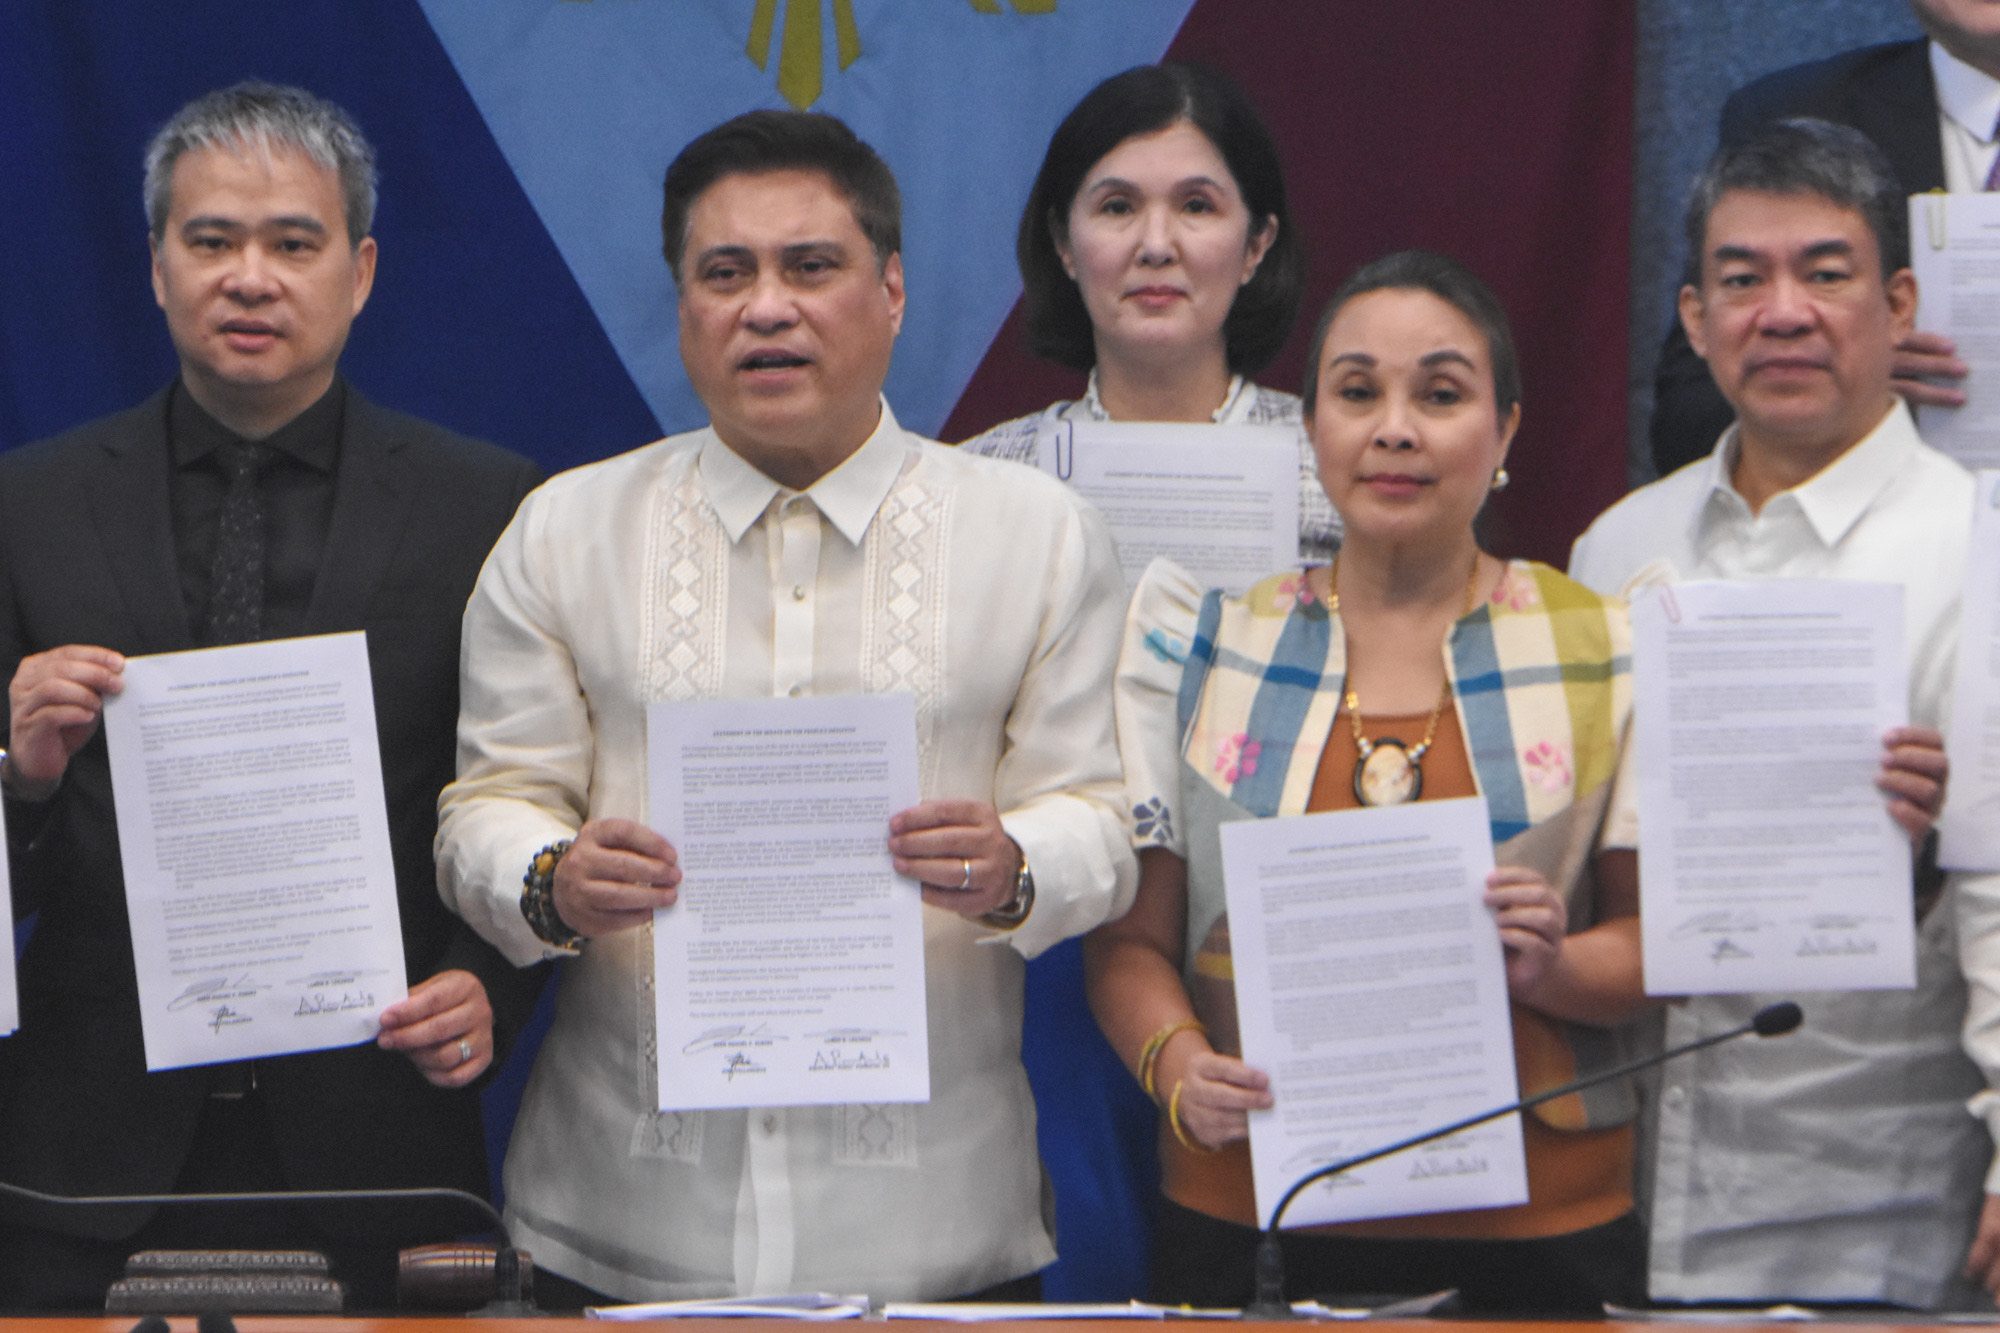 Senate, House joint resolution on Cha-Cha now suspended, says Pimentel